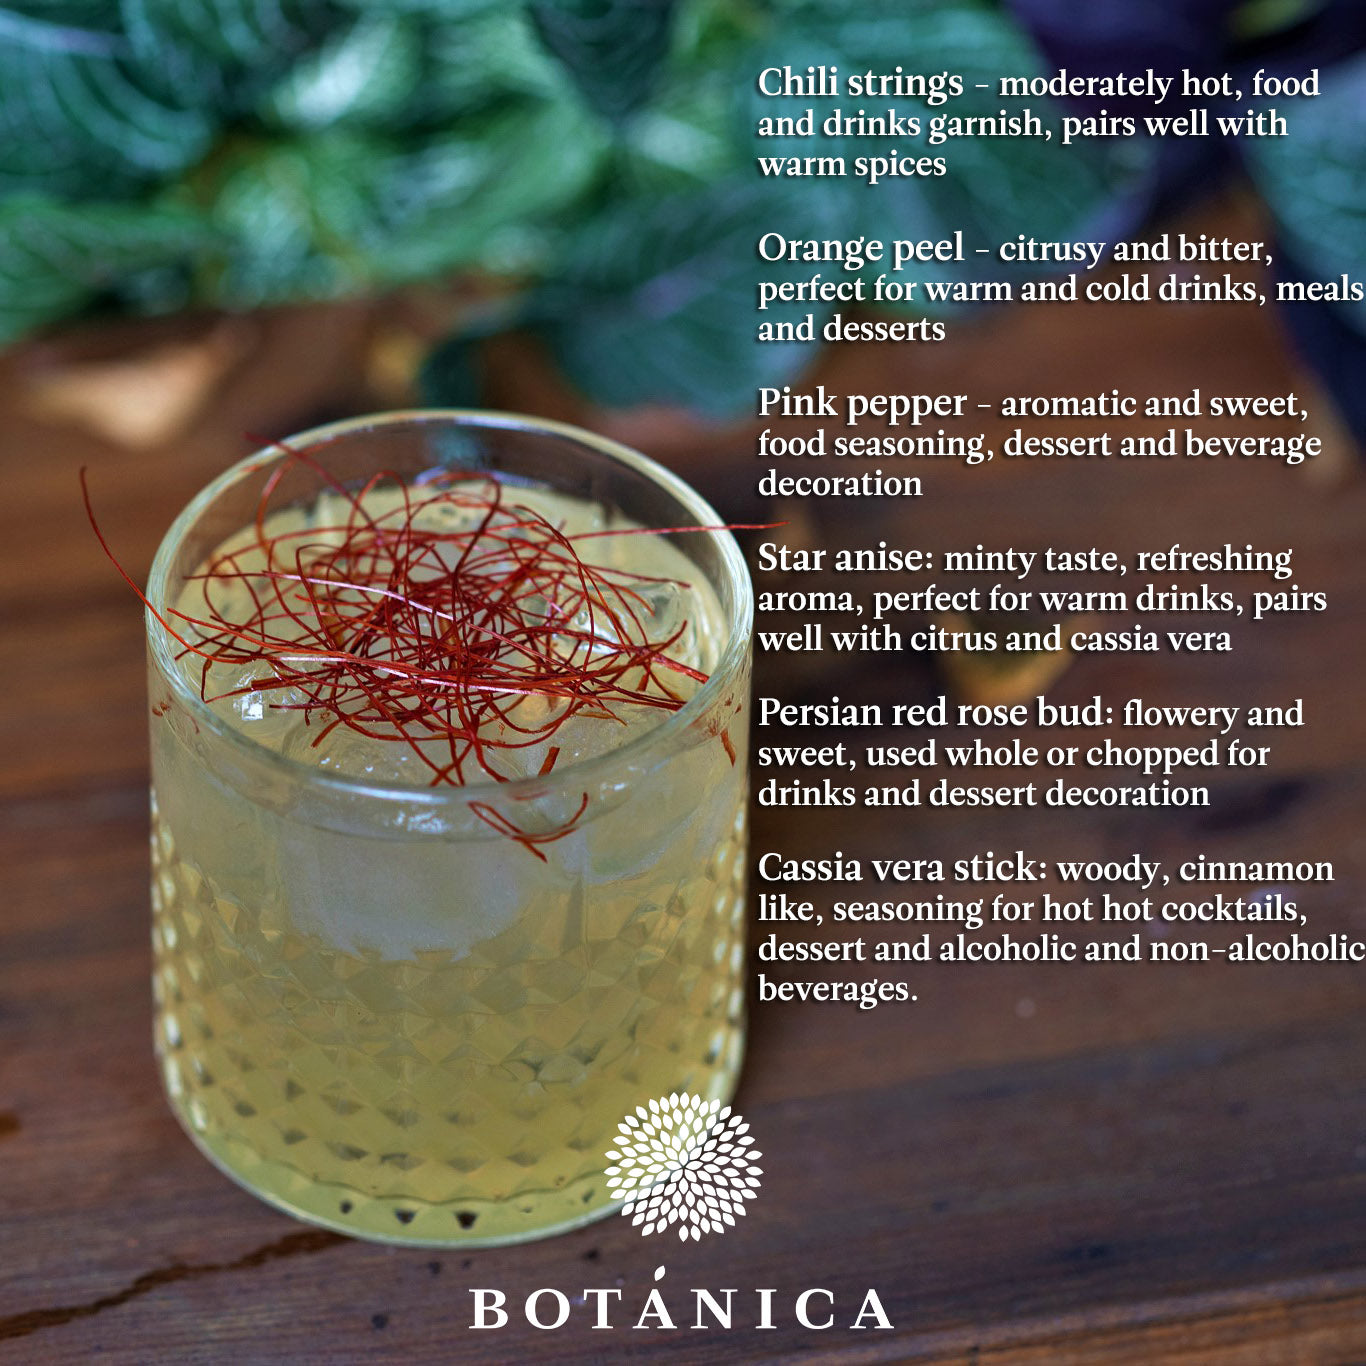 Midnight Botanica, Luxurious cocktail with botanical gin, herbal and floral  notes